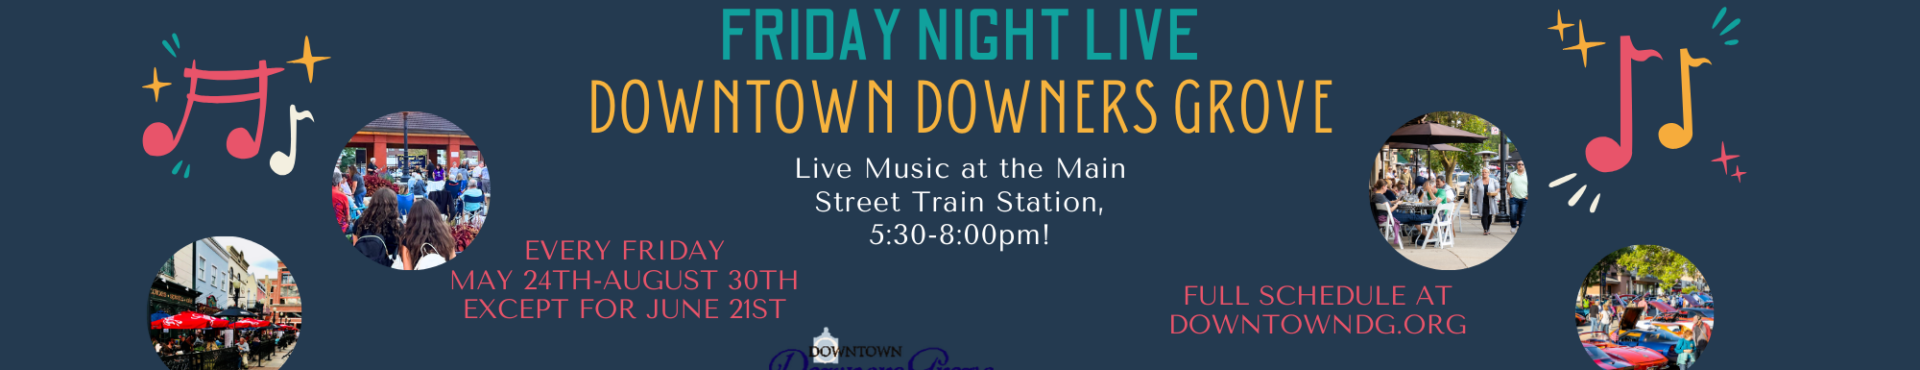 Friday Night Live Downtown Downers Grove banner